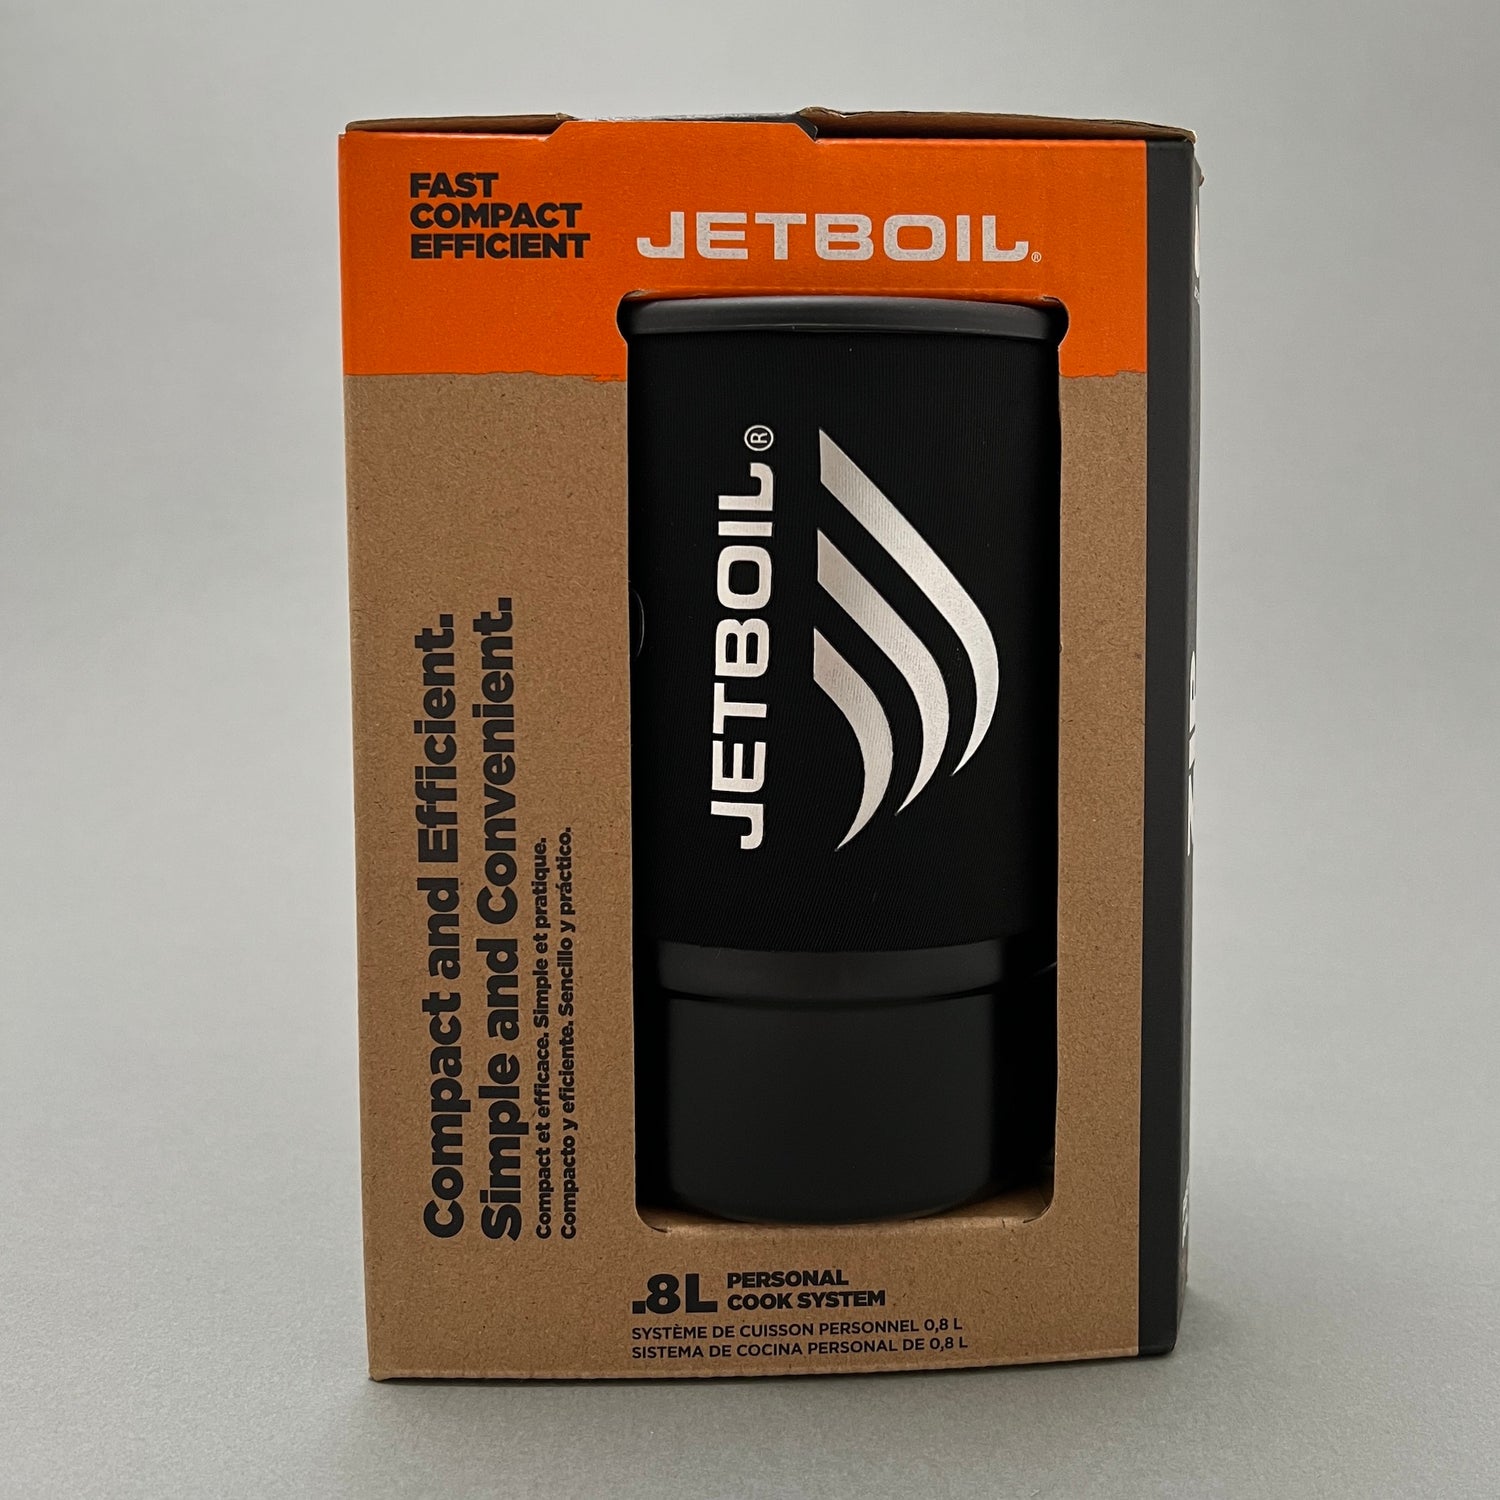 A camping stove from jetboil with a small gas container and a boiling pot inside its package sitting on a gray background